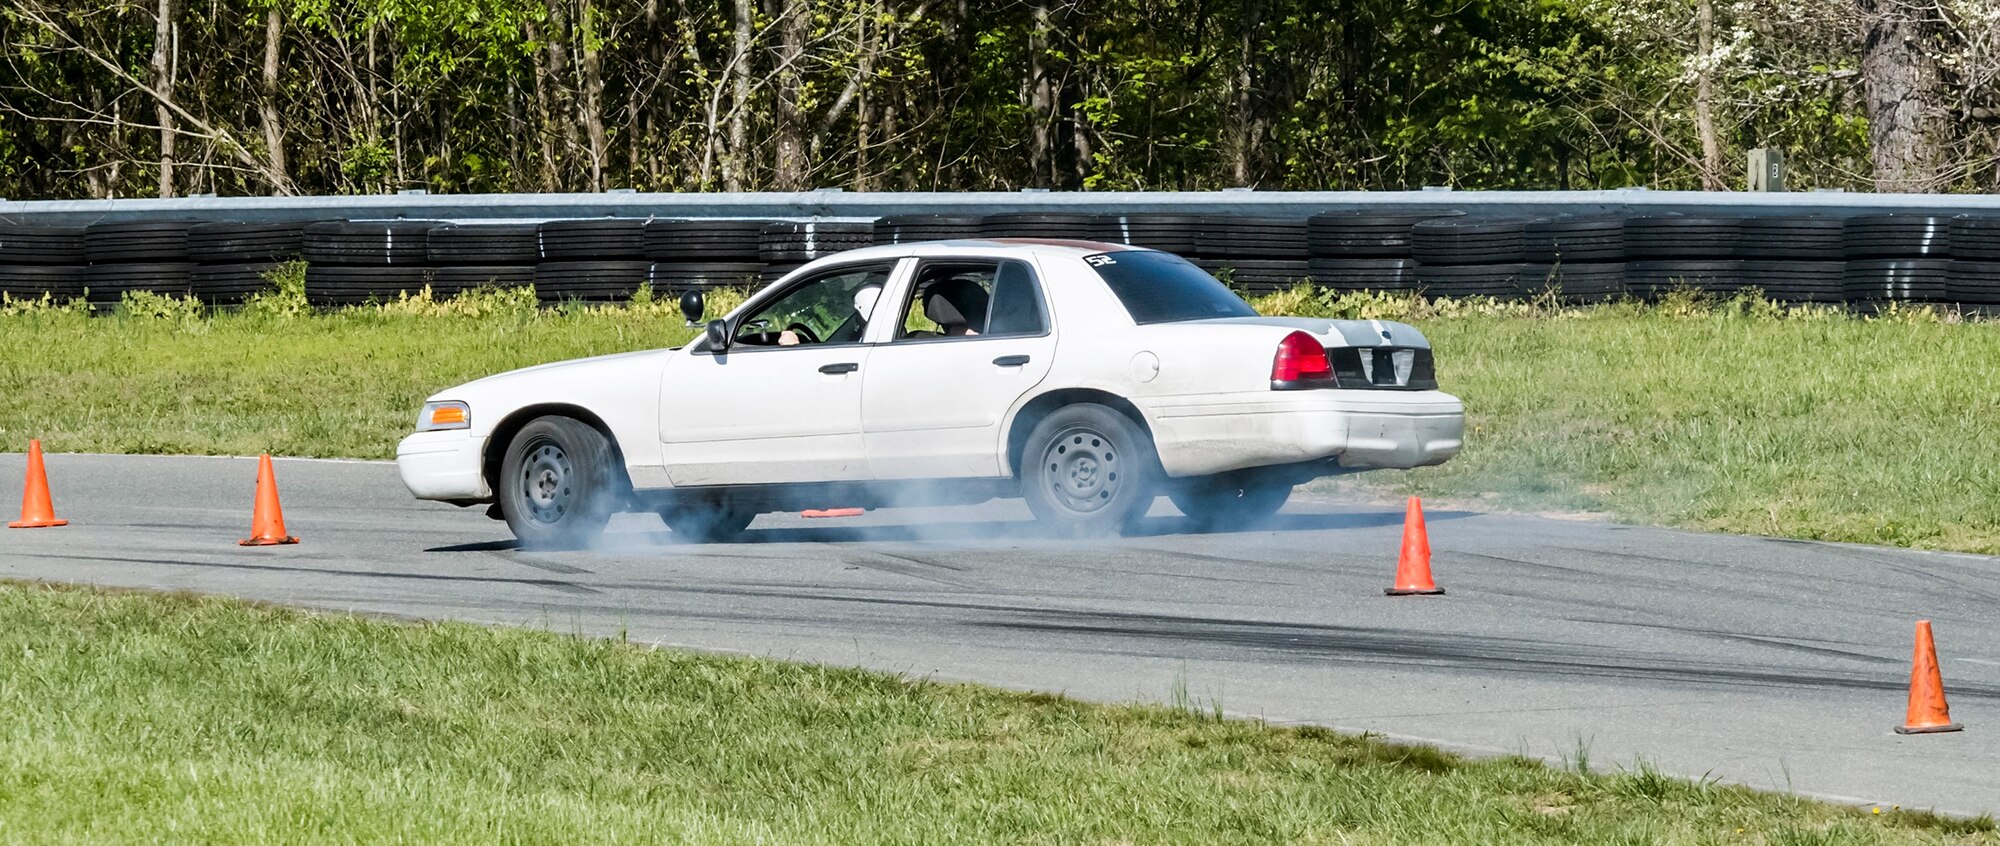 Participants demonstrate high-speed skid control technique during the instinctive driving training of the Senior Leader Security Seminar at Montross, Va., May 1, 2018. The unique two-day anti-terrorism course ensures the safety and survivability of  Air Force leaders traveling in medium to critical threat areas. (U.S. Air Force photo by Michael Hastings)